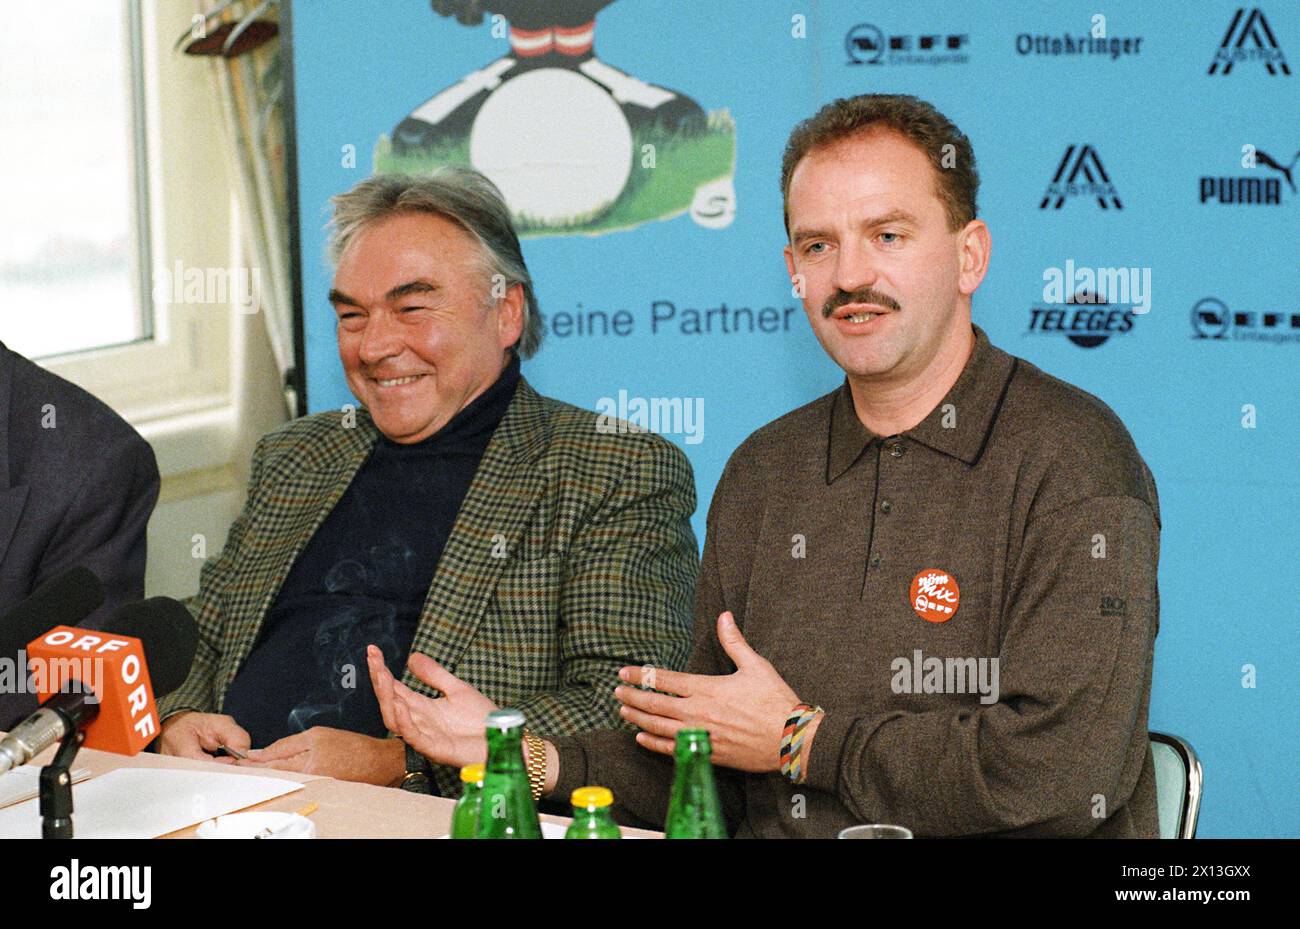 On 16 November 1995 Austrian football team coach Herbert Prohaska comments on the failure of the Austrian national team in the EC-qualification during a press conference. In the picture: Herbert Prohaska (R.) and OEFB (Austrian football association) president Beppo Mauhart (l.). - 19951116 PD0019 - Rechteinfo: Rights Managed (RM) Stock Photo